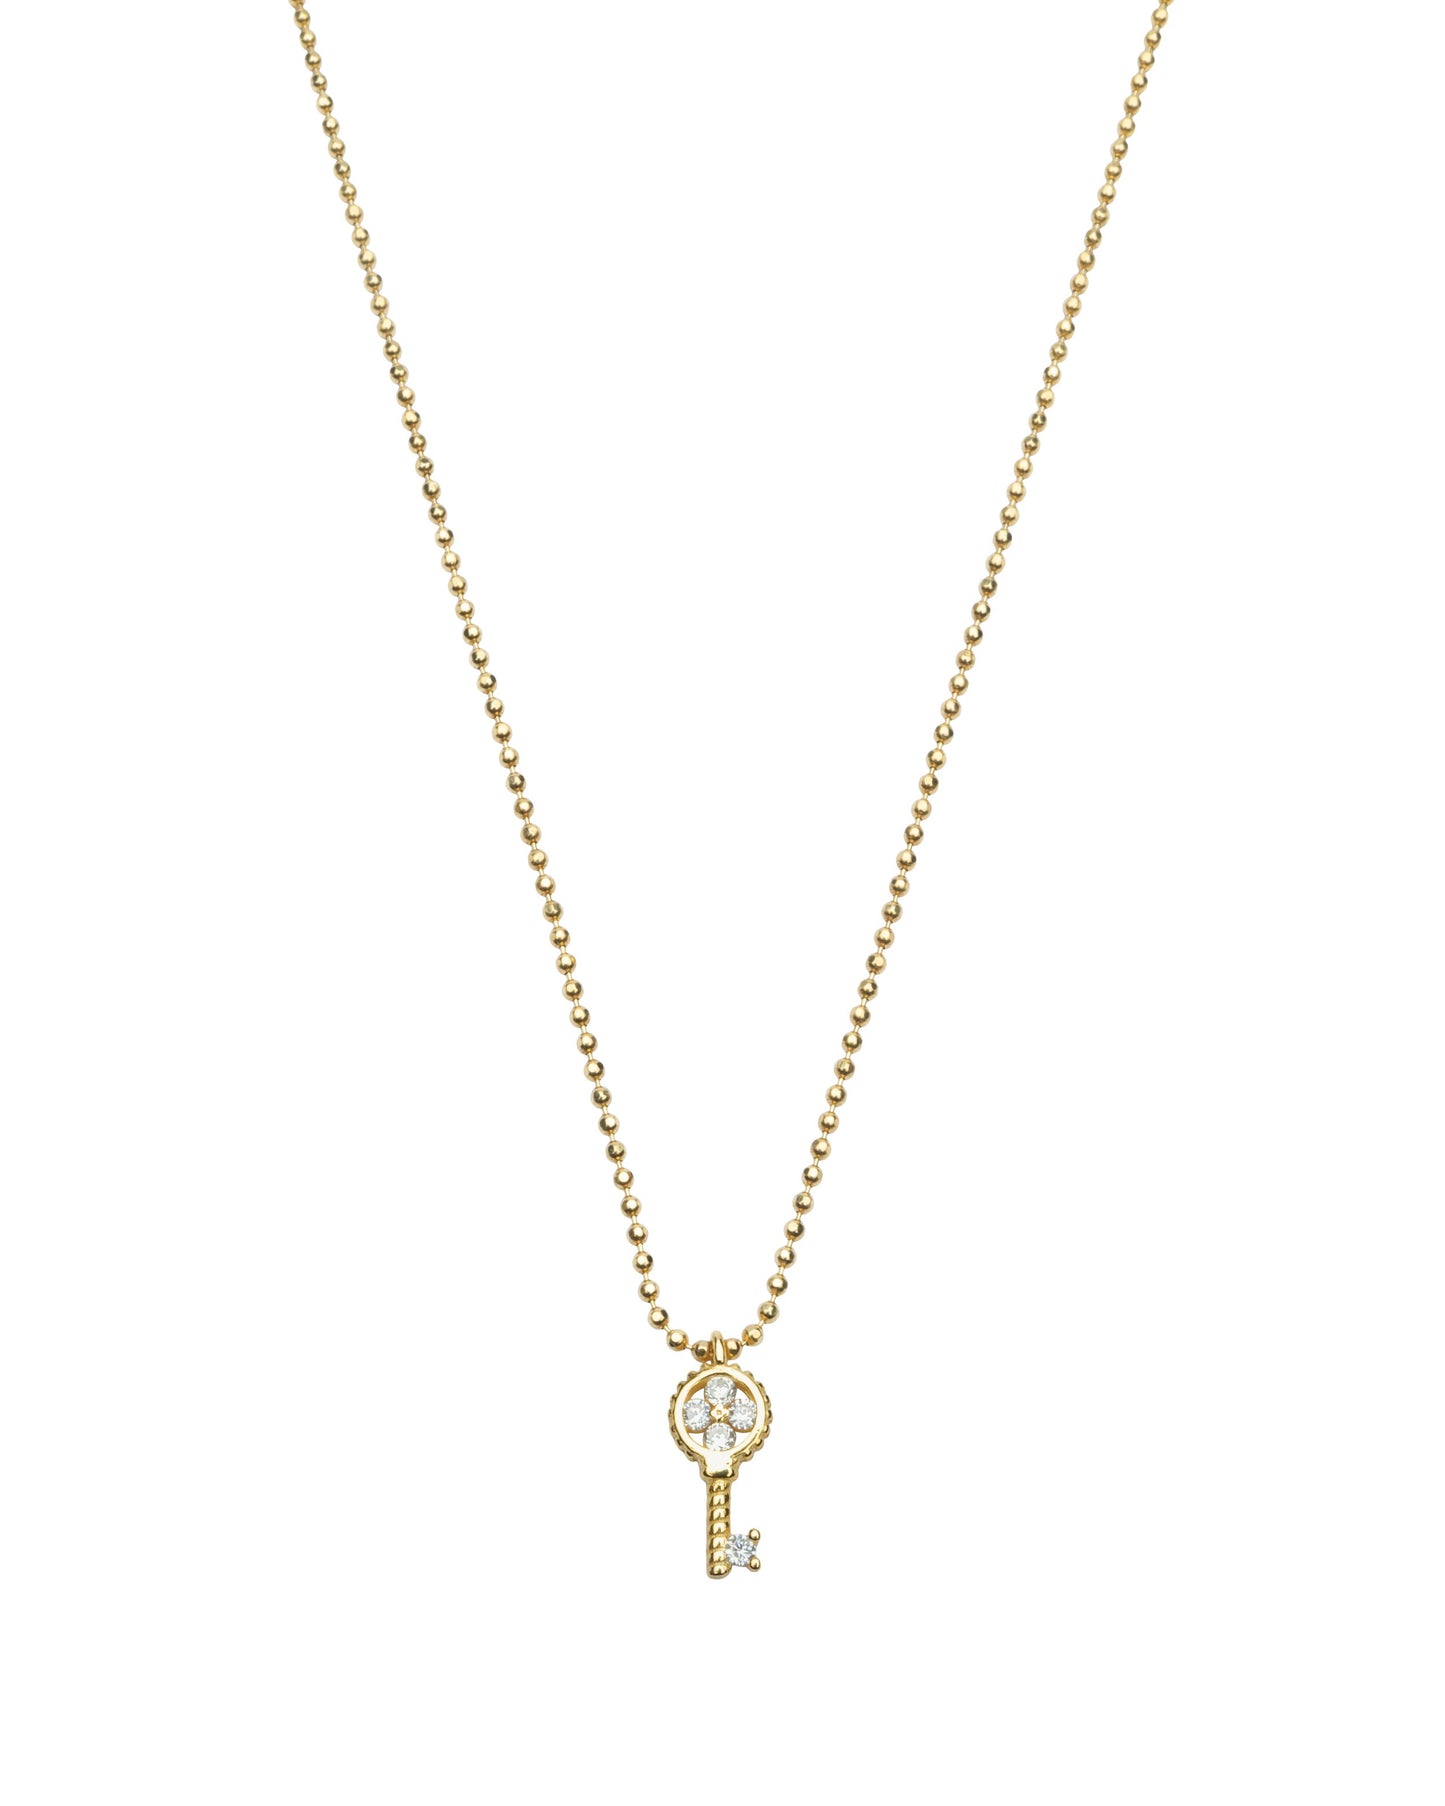 Key Necklace - Gold Plated